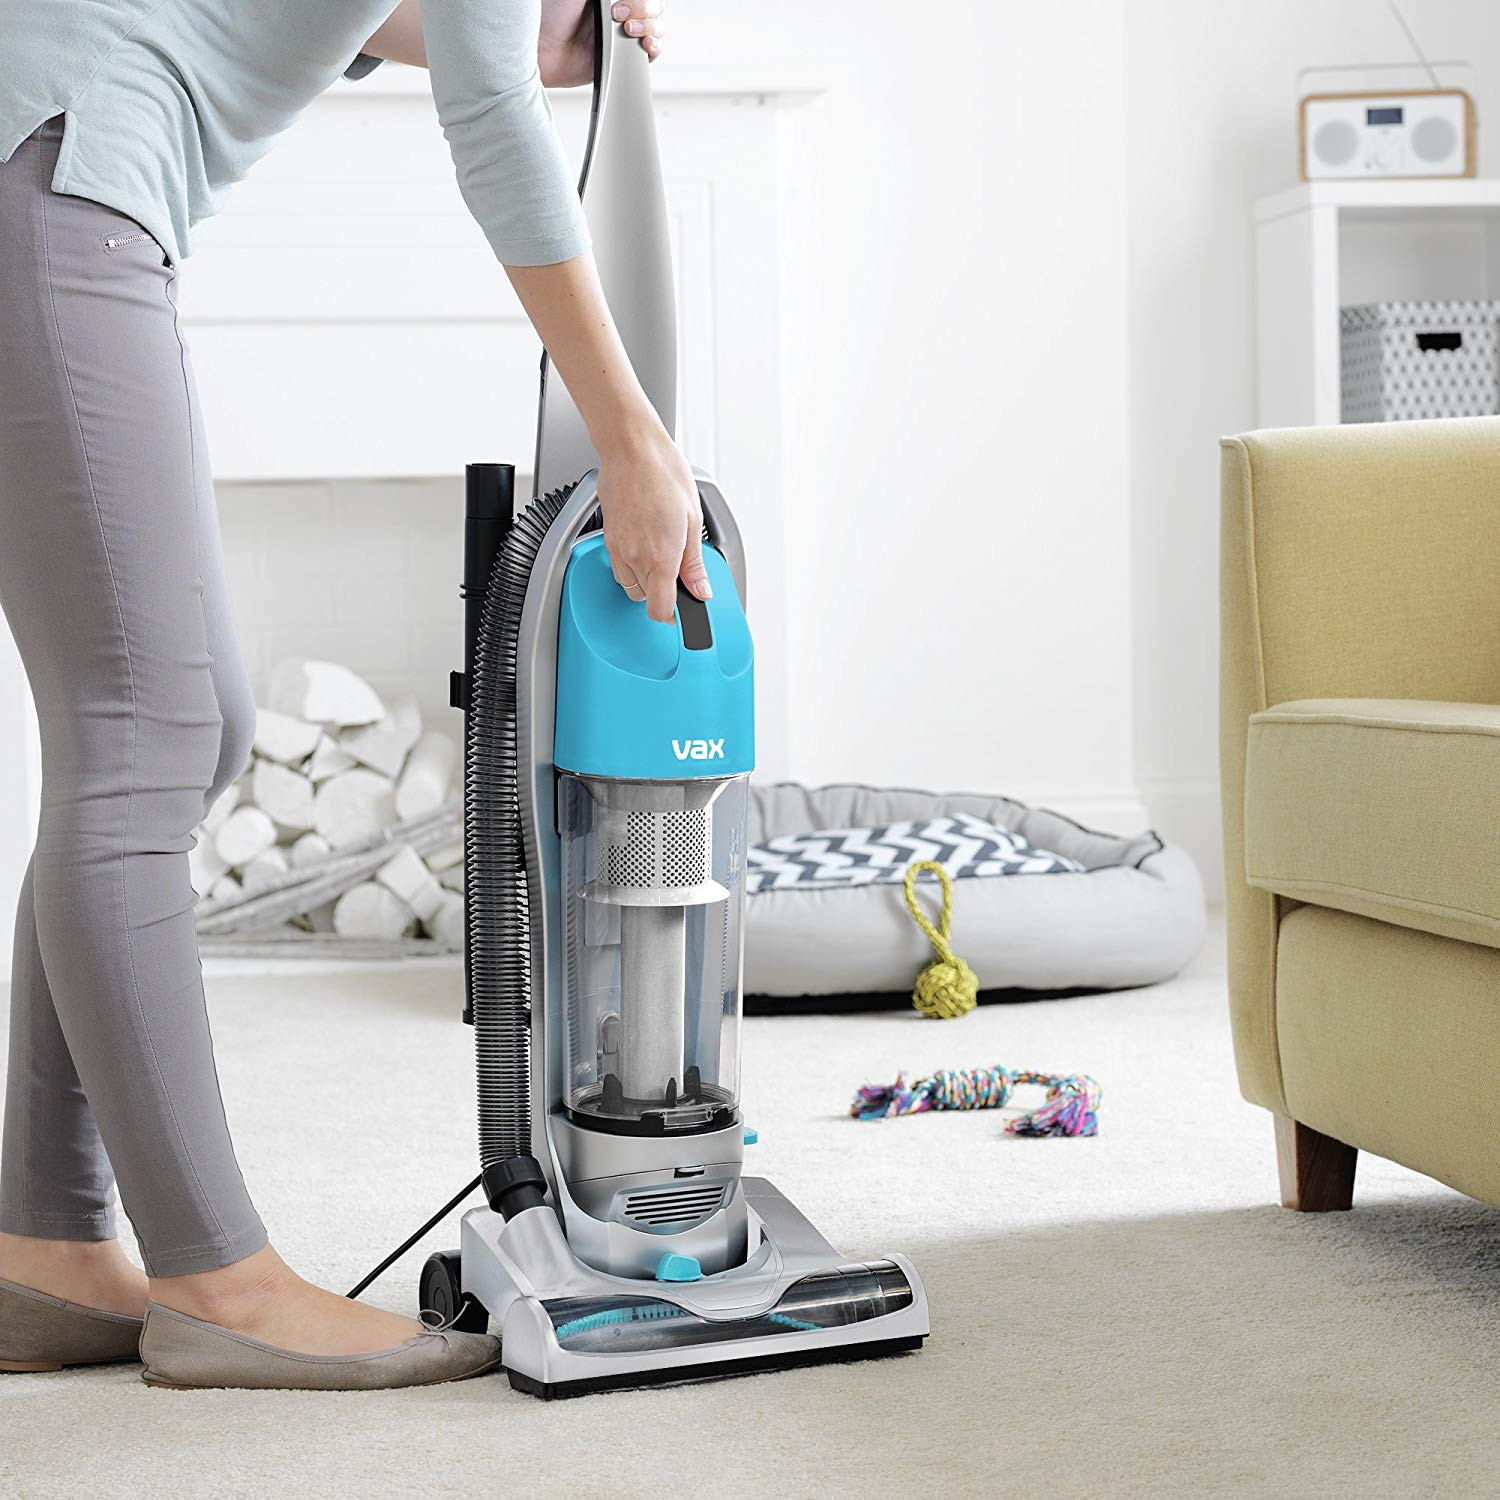 30 Trendy Best Sweeper for Hardwood Floors and Pet Hair 2024 free download best sweeper for hardwood floors and pet hair of vax ucnbawp1 power nano bagless upright vacuum cleaner 850 w 2 with regard to vax ucnbawp1 power nano bagless upright vacuum cleaner 850 w 2 